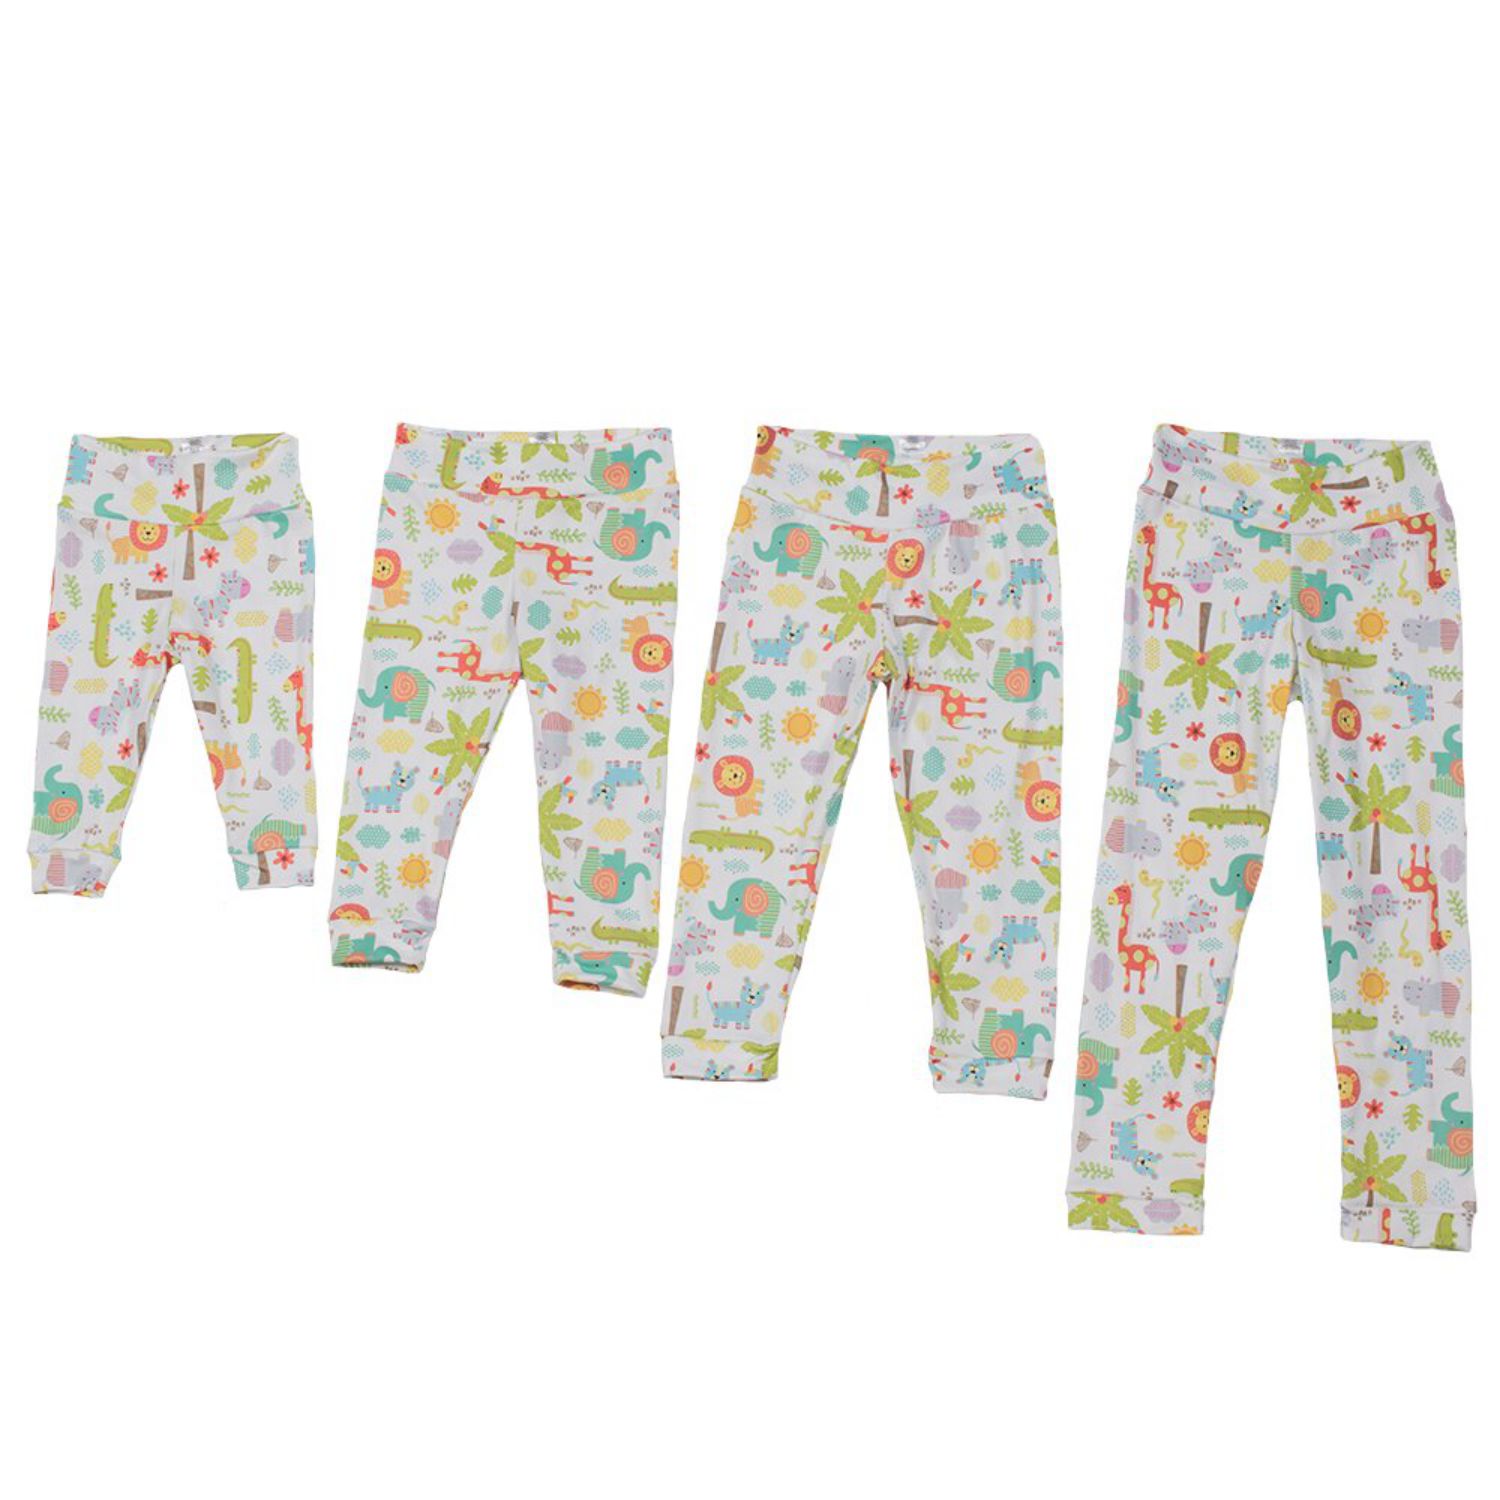 Bumblito Leggings Größe: XL (110 - 116) / Muster: Wild About you